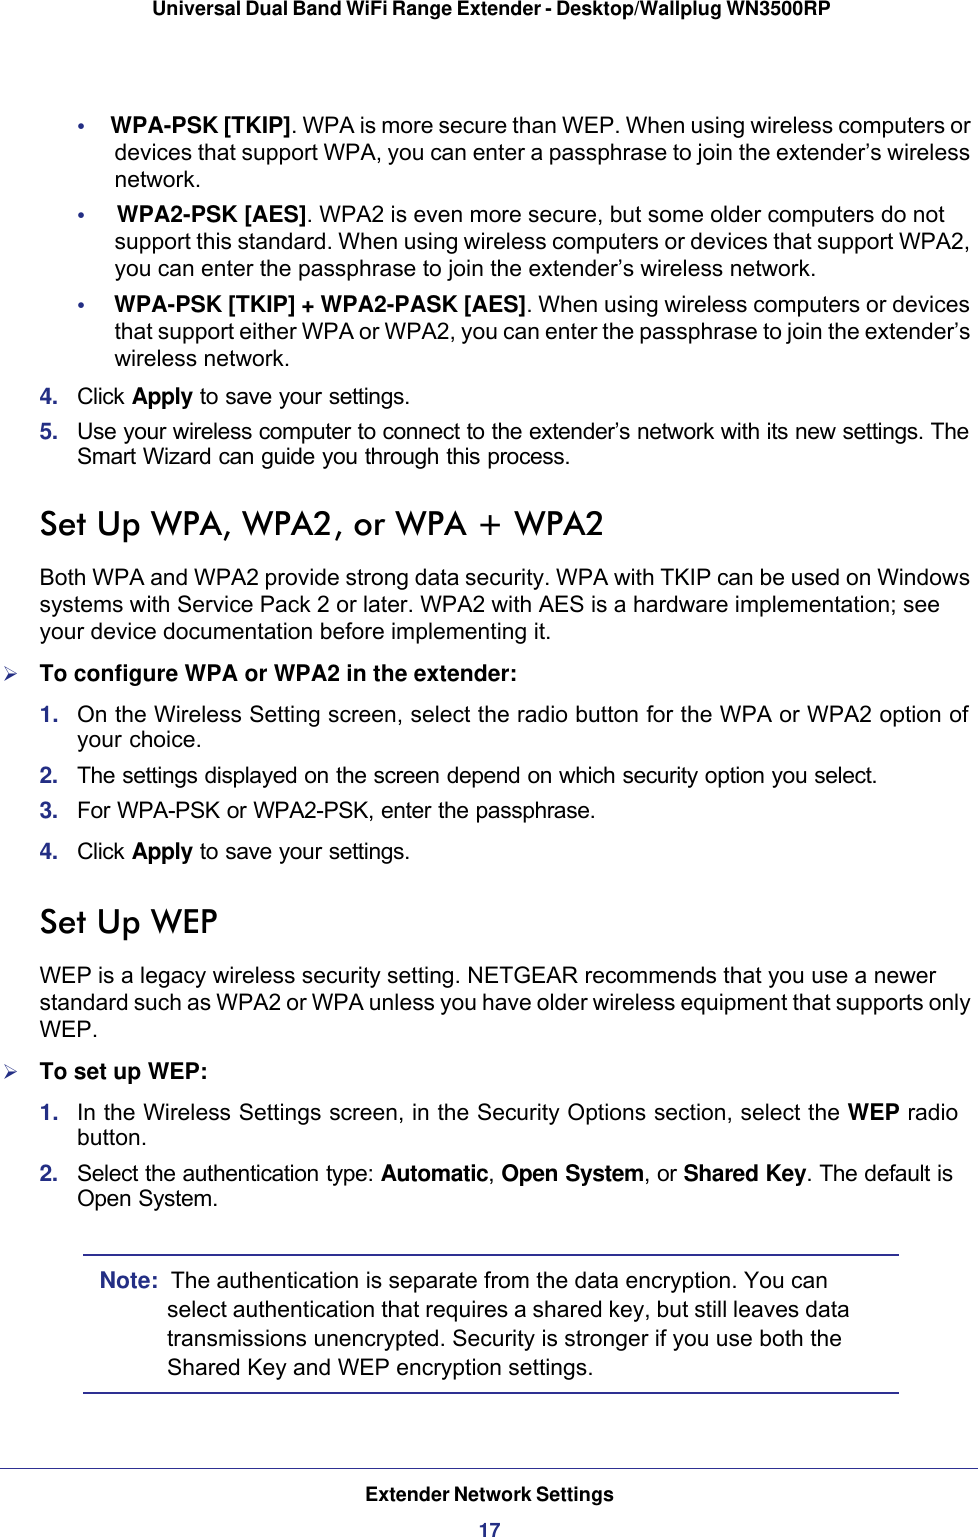 Extender Network Settings17 Universal Dual Band WiFi Range Extender - Desktop/Wallplug WN3500RP•     WPA-PSK [TKIP]. WPA is more secure than WEP. When using wireless computers or devices that support WPA, you can enter a passphrase to join the extender’s wireless network.•     WPA2-PSK [AES]. WPA2 is even more secure, but some older computers do not support this standard. When using wireless computers or devices that support WPA2, you can enter the passphrase to join the extender’s wireless network.•     WPA-PSK [TKIP] + WPA2-PASK [AES]. When using wireless computers or devices that support either WPA or WPA2, you can enter the passphrase to join the extender’s wireless network.4.  Click Apply to save your settings.5.  Use your wireless computer to connect to the extender’s network with its new settings. The Smart Wizard can guide you through this process. Set Up WPA, WPA2, or WPA + WPA2Both WPA and WPA2 provide strong data security. WPA with TKIP can be used on Windows systems with Service Pack 2 or later. WPA2 with AES is a hardware implementation; see your device documentation before implementing it. To configure WPA or WPA2 in the extender:1.  On the Wireless Setting screen, select the radio button for the WPA or WPA2 option of your choice.2.  The settings displayed on the screen depend on which security option you select.3.  For WPA-PSK or WPA2-PSK, enter the passphrase. 4.  Click Apply to save your settings.Set Up WEPWEP is a legacy wireless security setting. NETGEAR recommends that you use a newer standard such as WPA2 or WPA unless you have older wireless equipment that supports only WEP.To set up WEP:1.  In the Wireless Settings screen, in the Security Options section, select the WEP radio button.2.  Select the authentication type: Automatic, Open System, or Shared Key. The default is Open System.Note:  The authentication is separate from the data encryption. You can select authentication that requires a shared key, but still leaves data transmissions unencrypted. Security is stronger if you use both the Shared Key and WEP encryption settings.